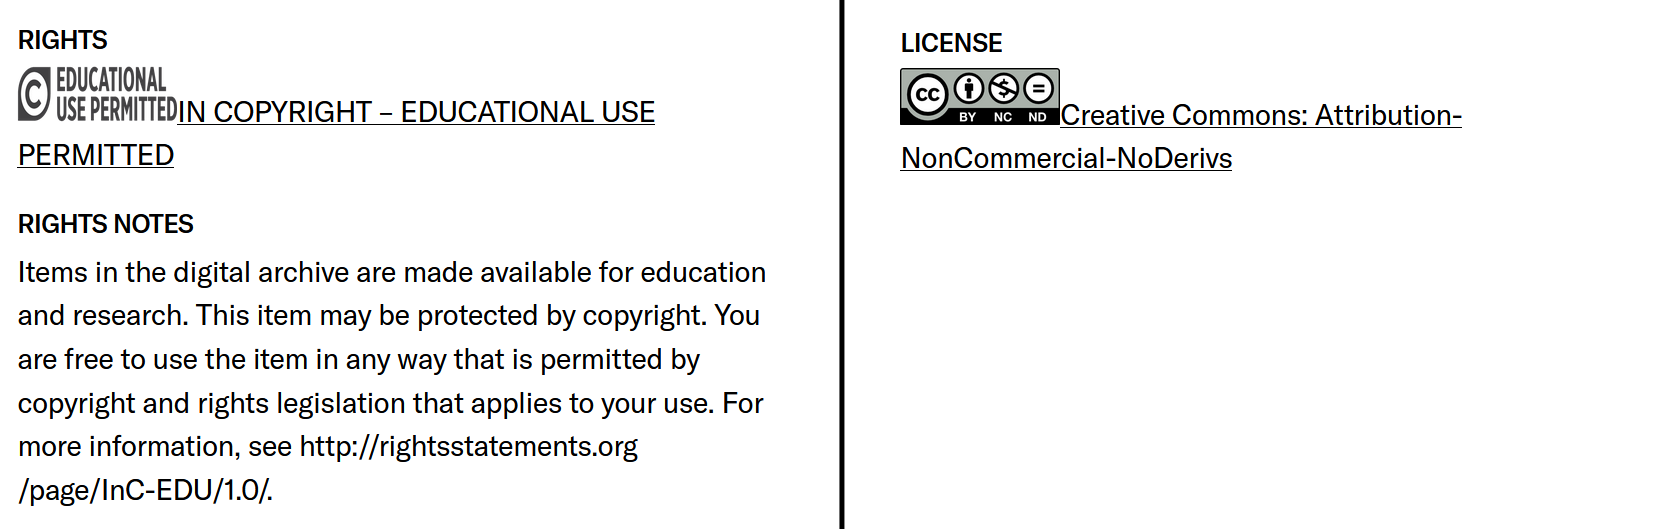 Examples of license and rights statements for an image item